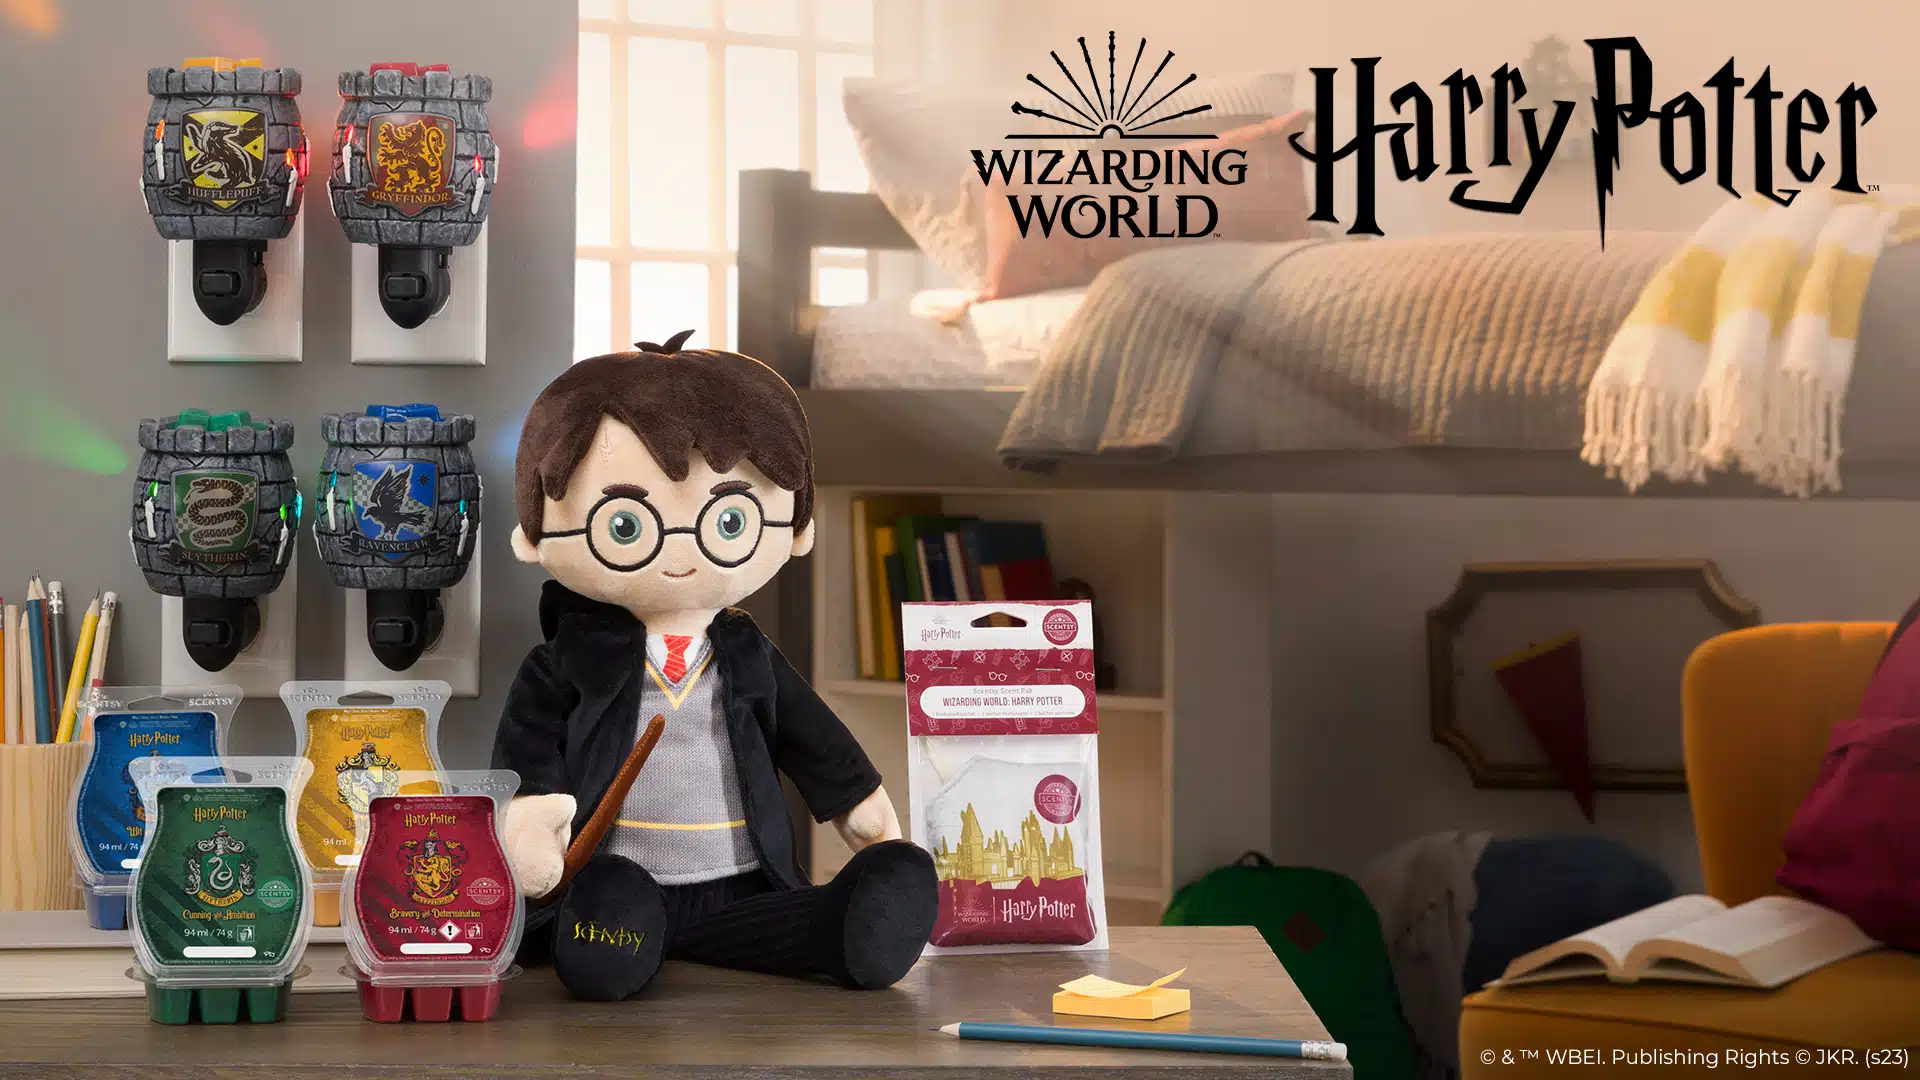 Berni on X: This awesome Harry Potter wax warmer will be